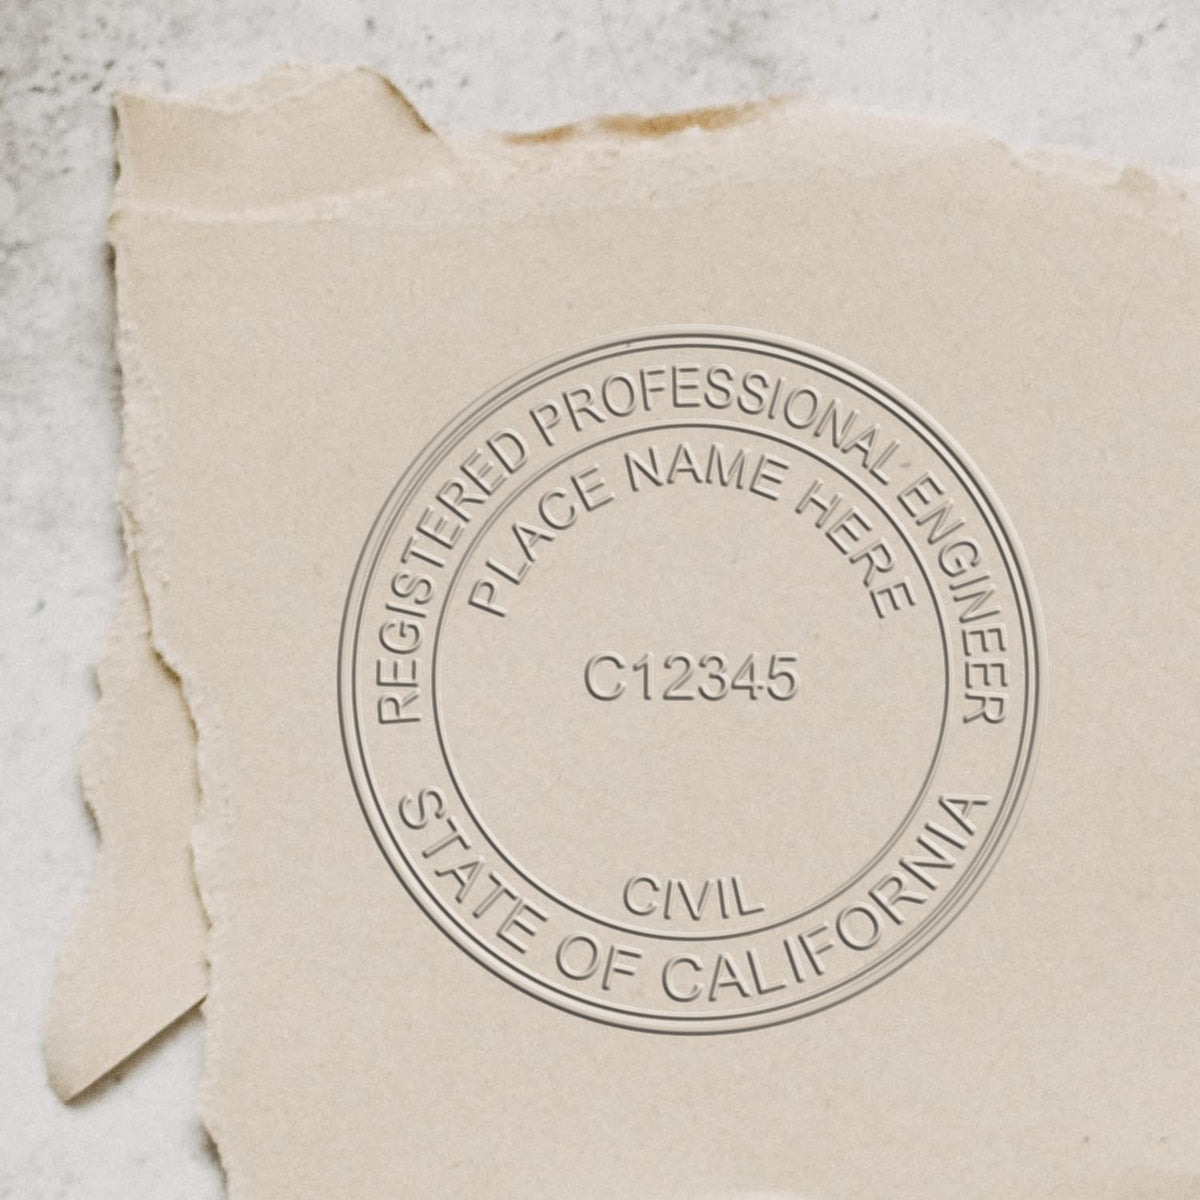 The Heavy Duty Cast Iron California Engineer Seal Embosser stamp impression comes to life with a crisp, detailed photo on paper - showcasing true professional quality.